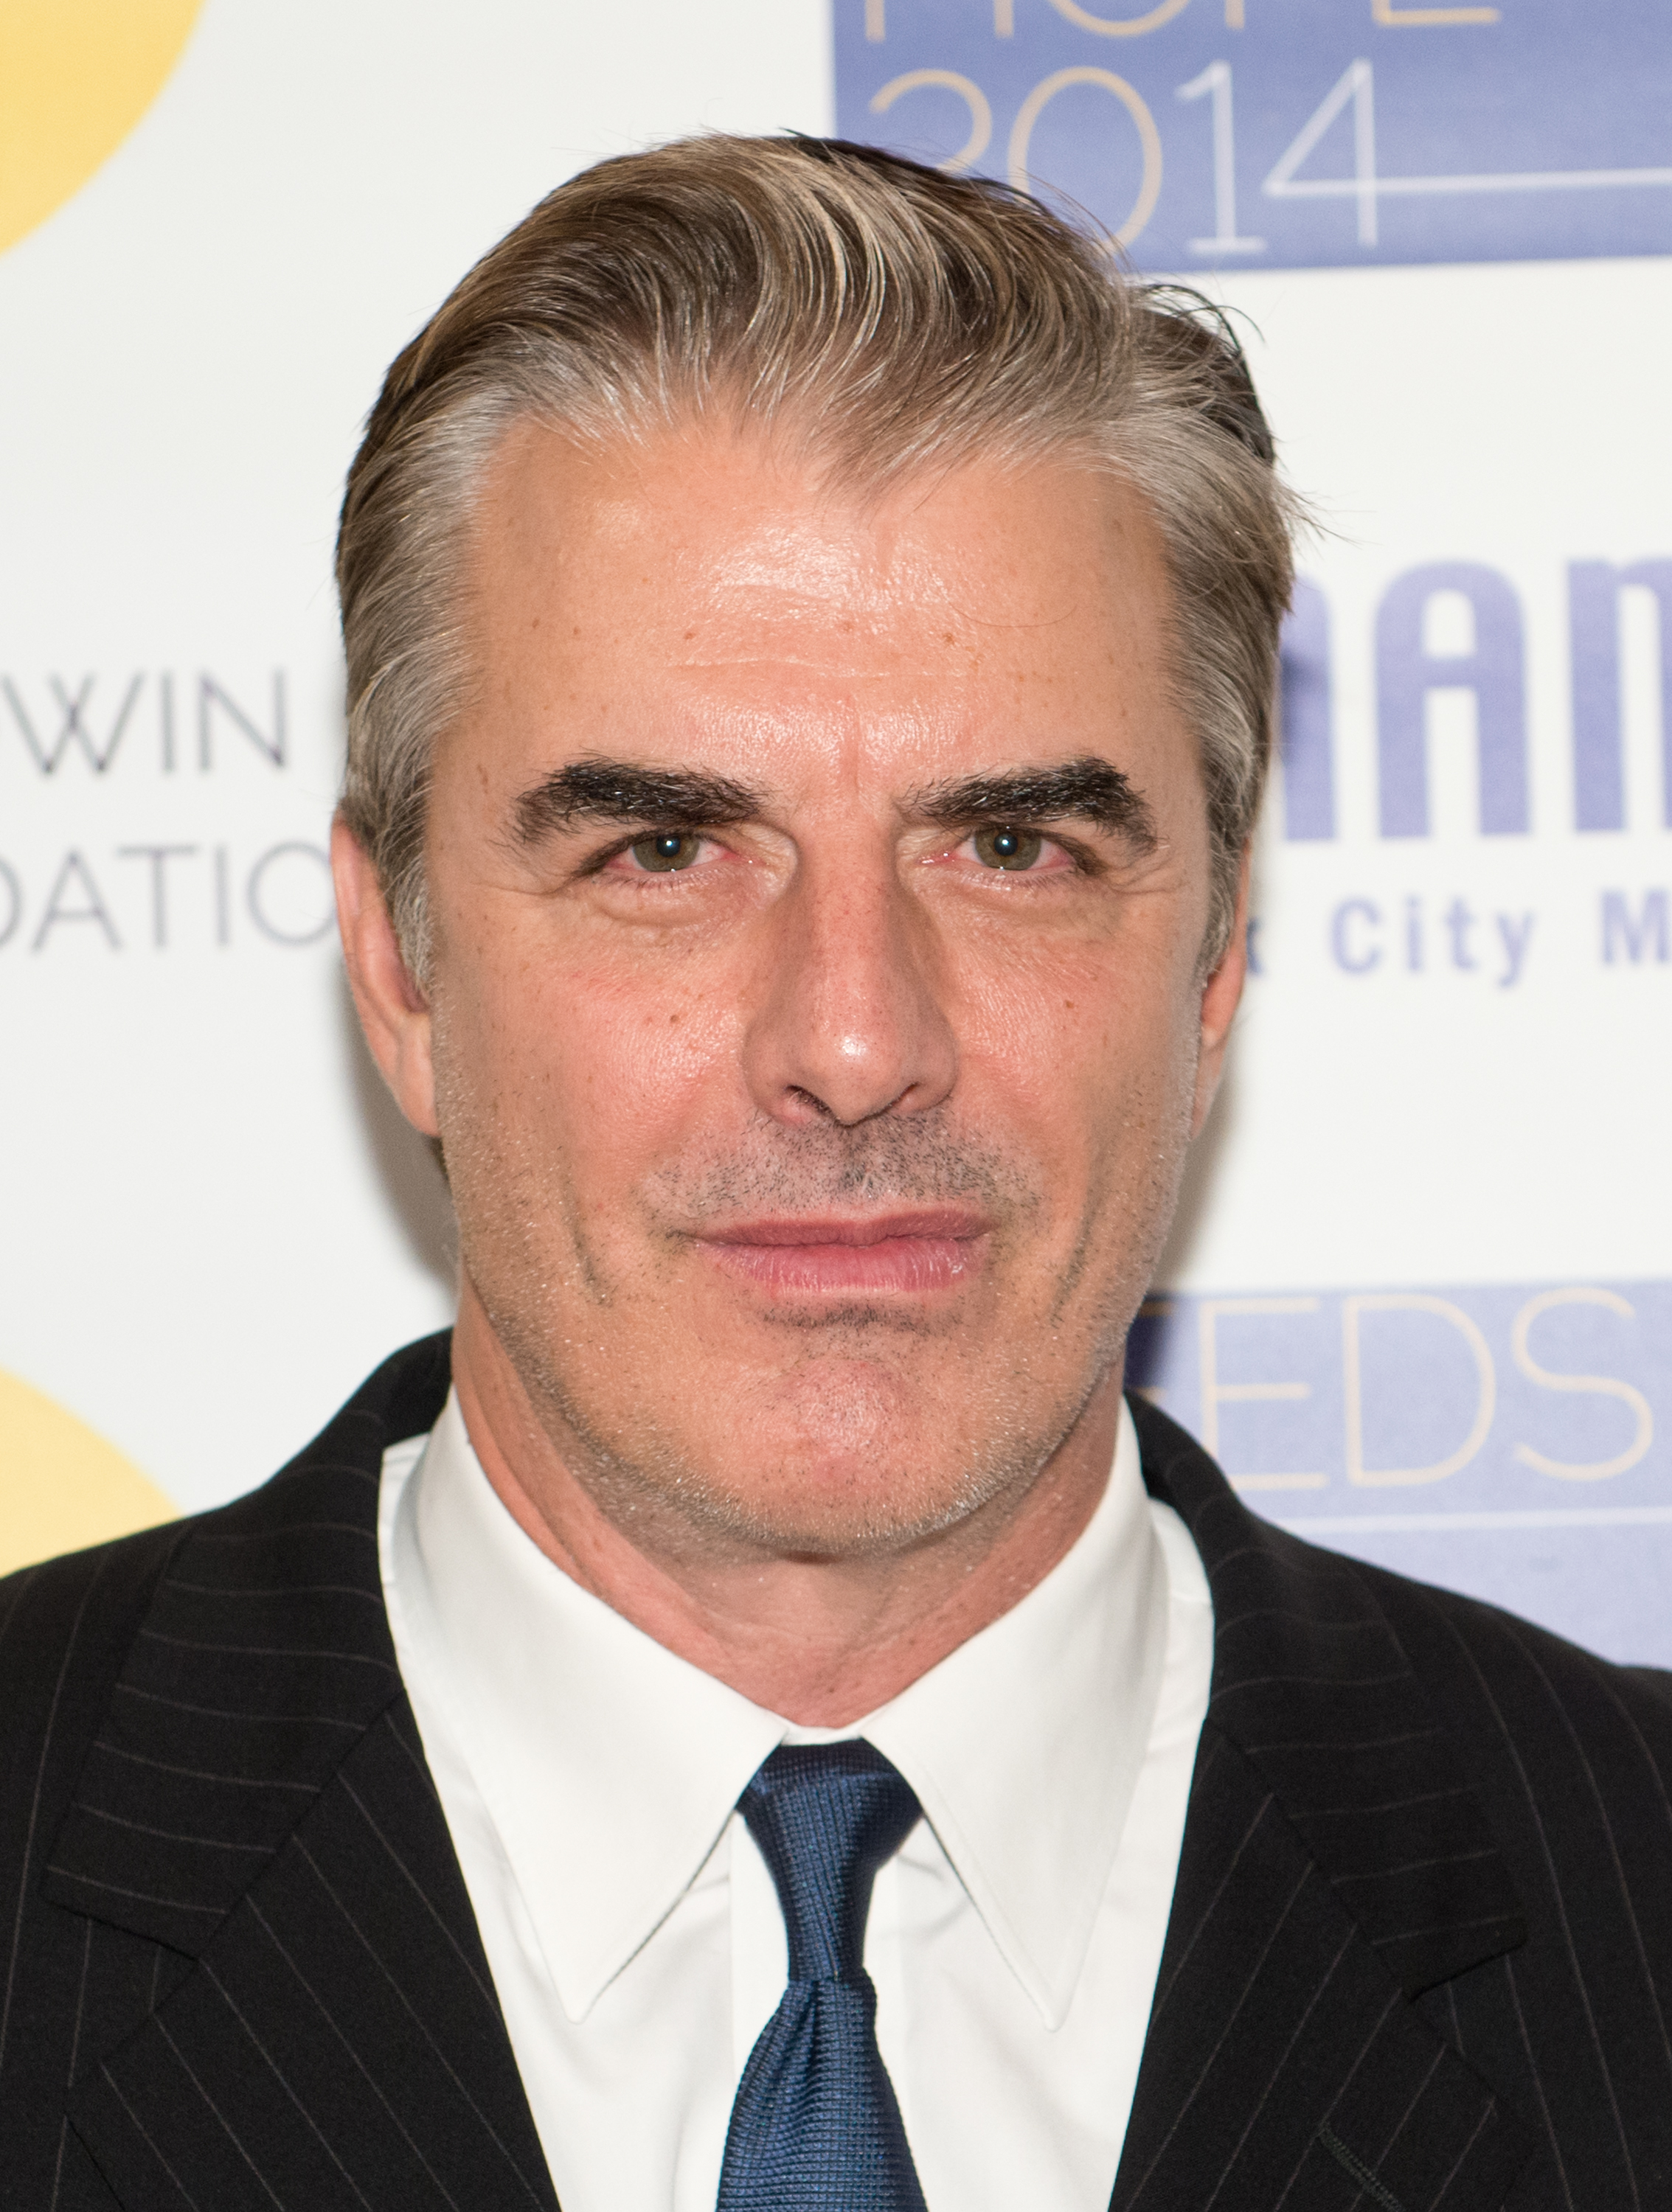 Actor Chris Noth attends the 2014 NAMI-NYC Metro Seeds Of Hope Gala at Altman Building on Nov. 6, 2014 in New York City.